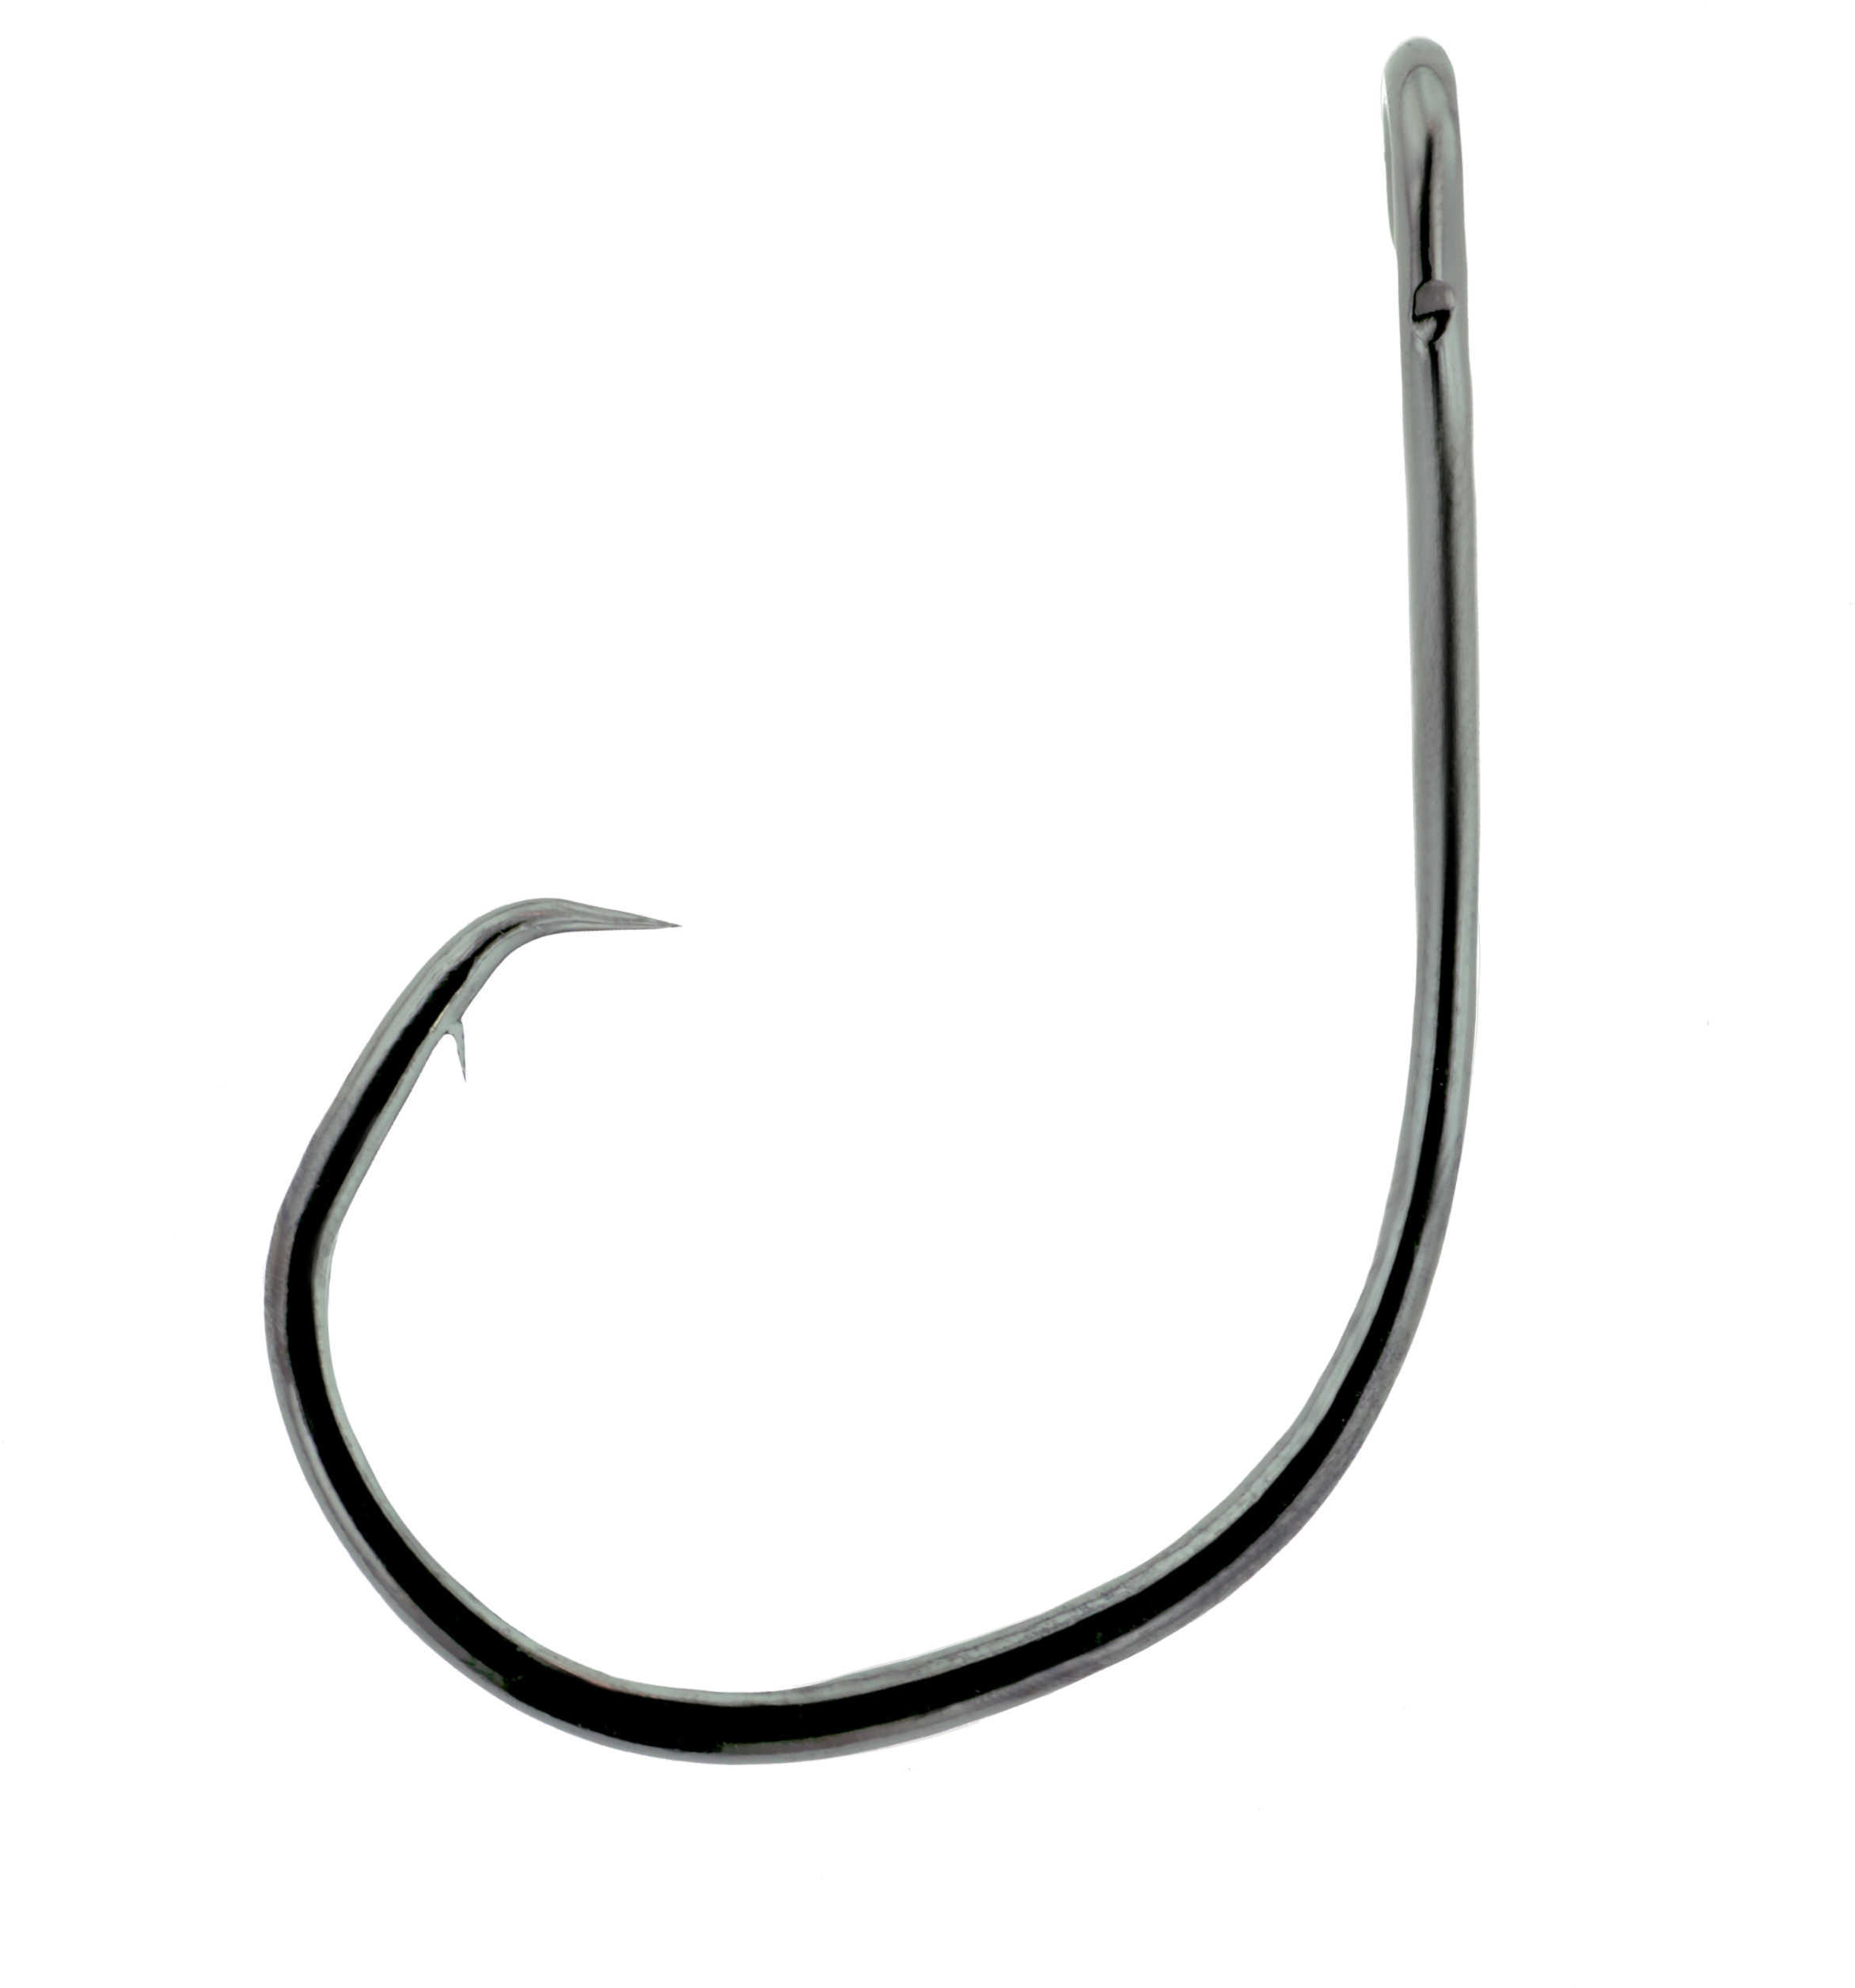 Eagle Claw Fishing Tackle Lazer Circle Mid-Wire Non-Offset Hook, Platinum Black Size 12/0 (Per 5) Md: L2004GH-12/0